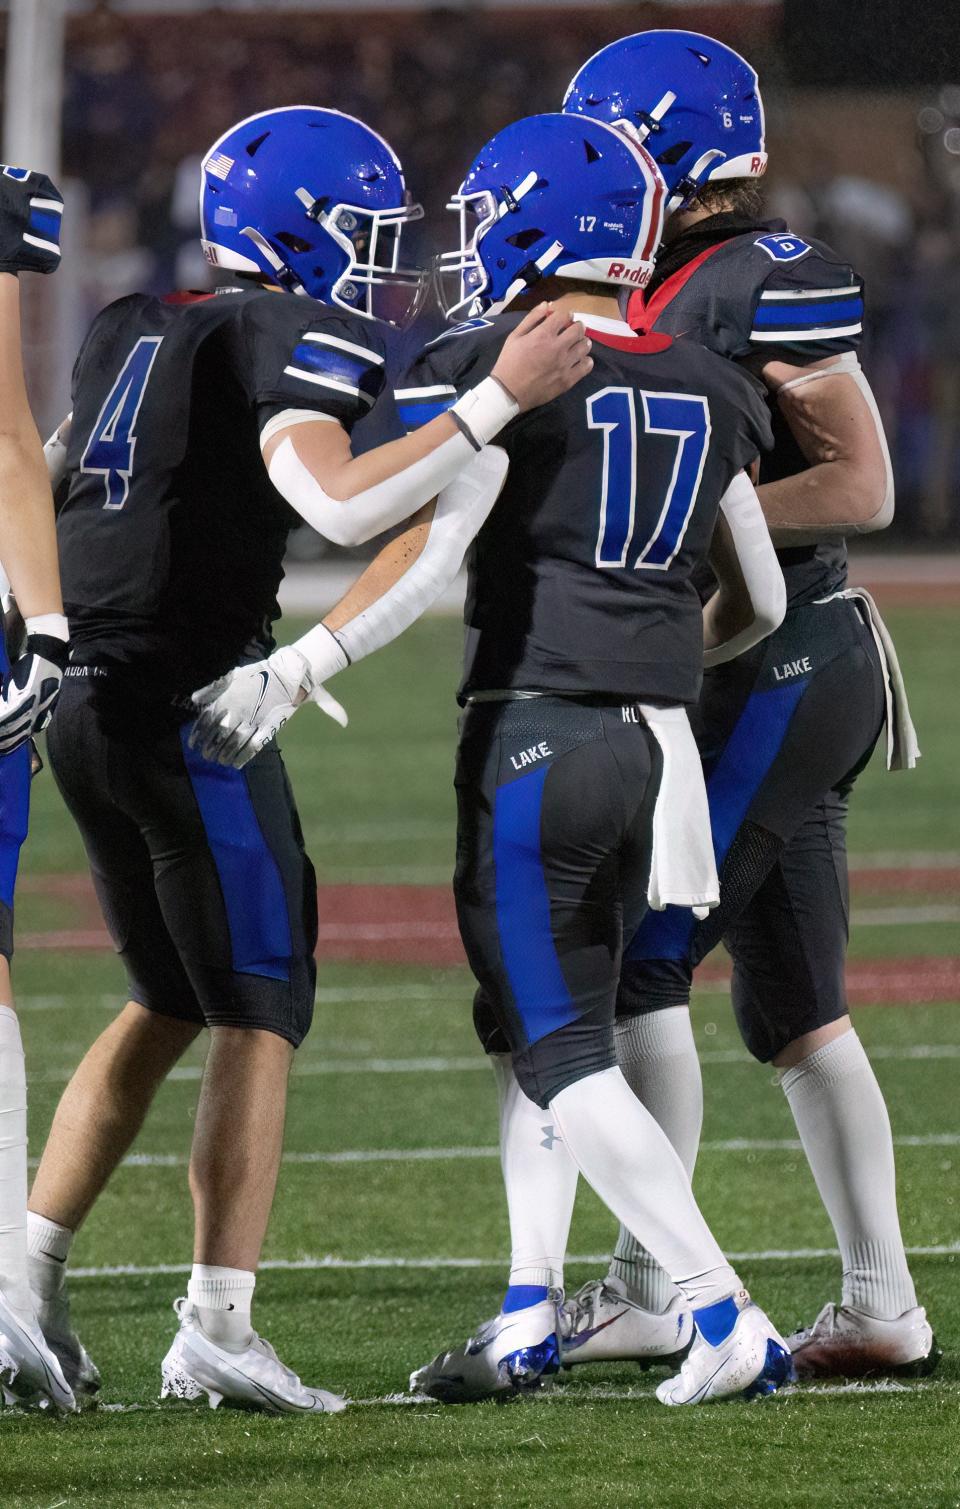 Lake’s Joseph Garro (4) congratulates Celton Dutton (17) after he made a field goal in the fourth quarter to give Lake a 10-7 lead over Westerville South on Friday, Nov. 11, 2022.